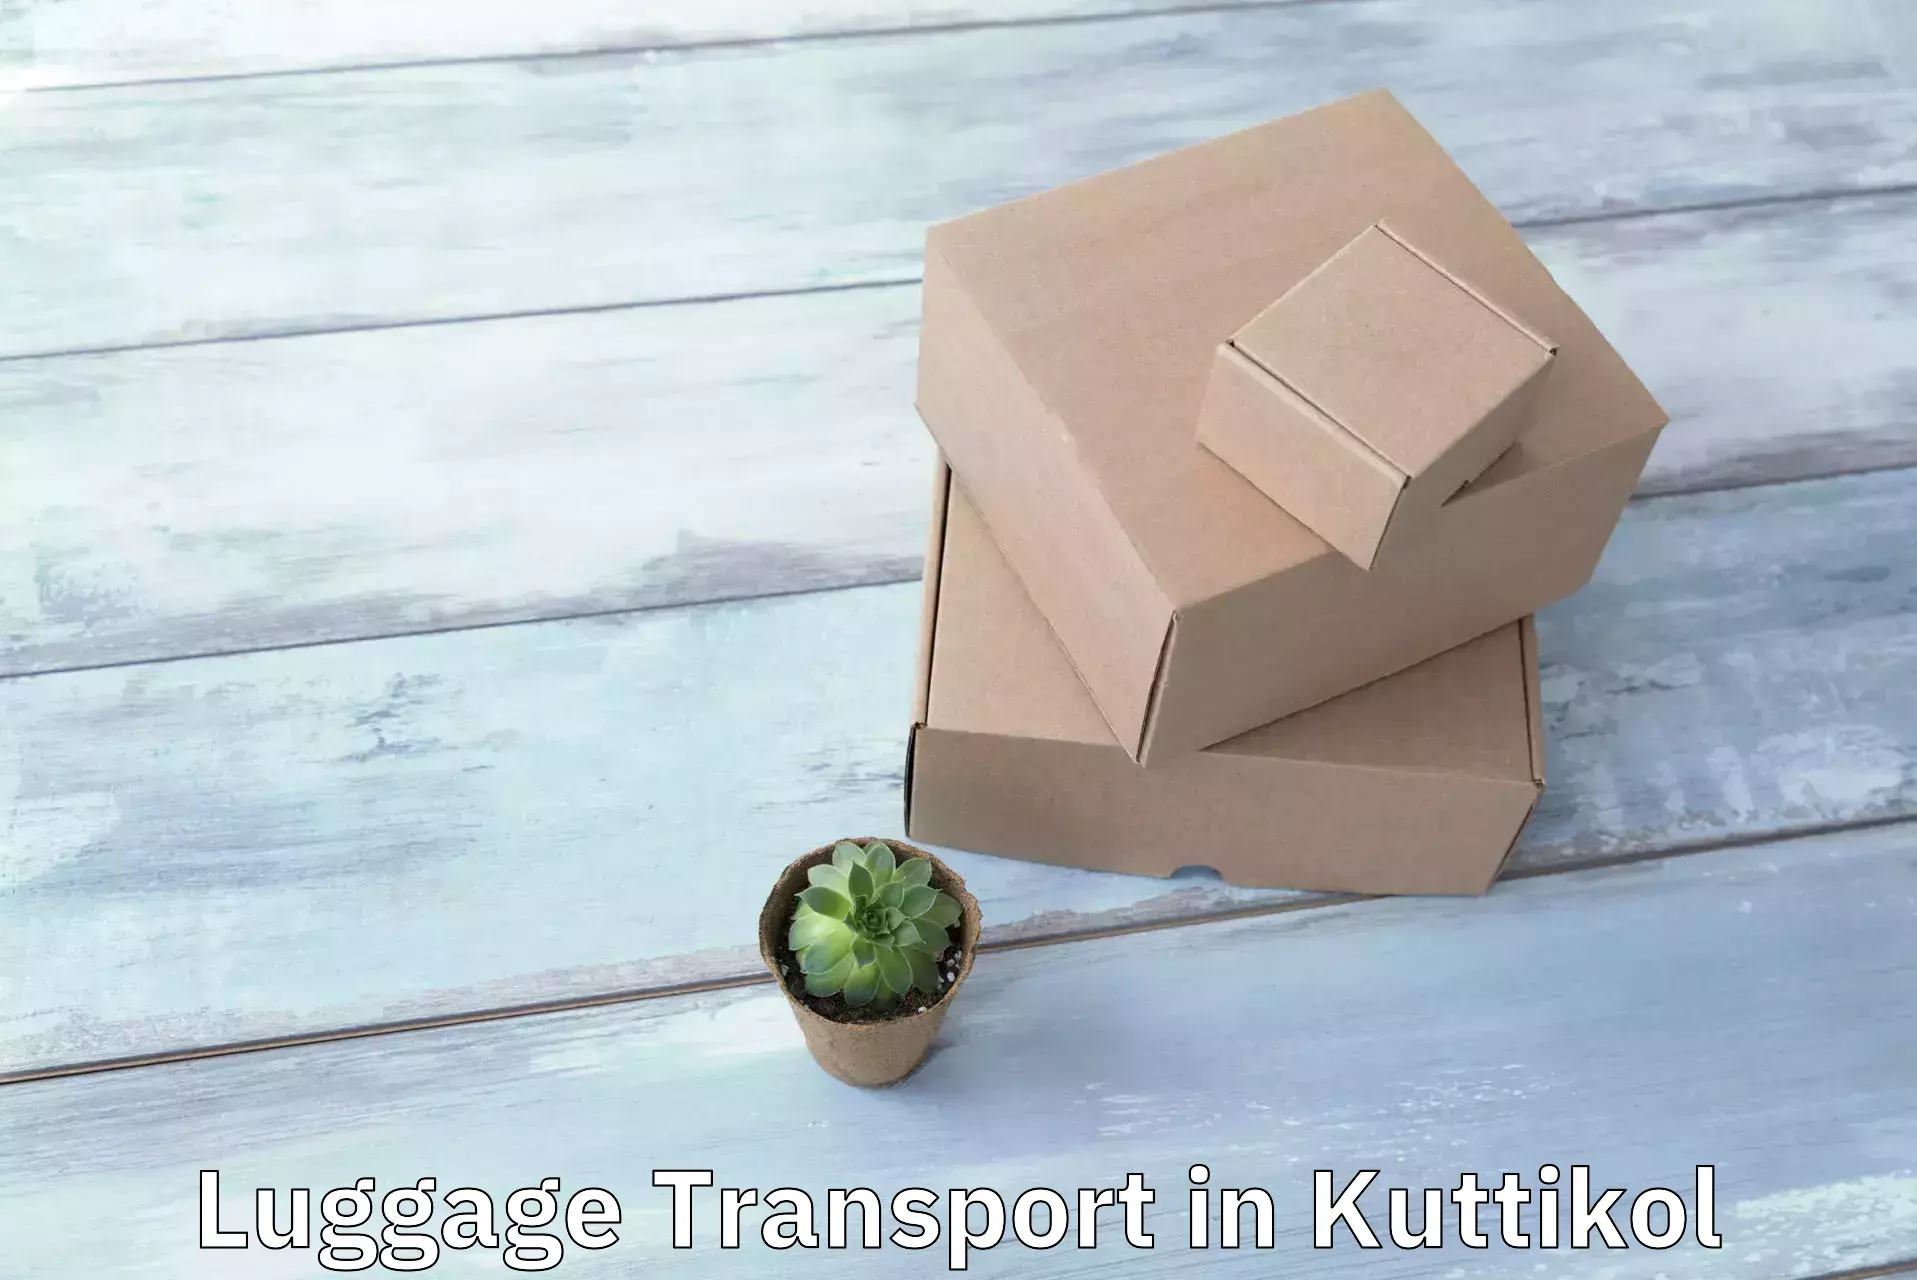 Instant baggage transport quote in Kuttikol